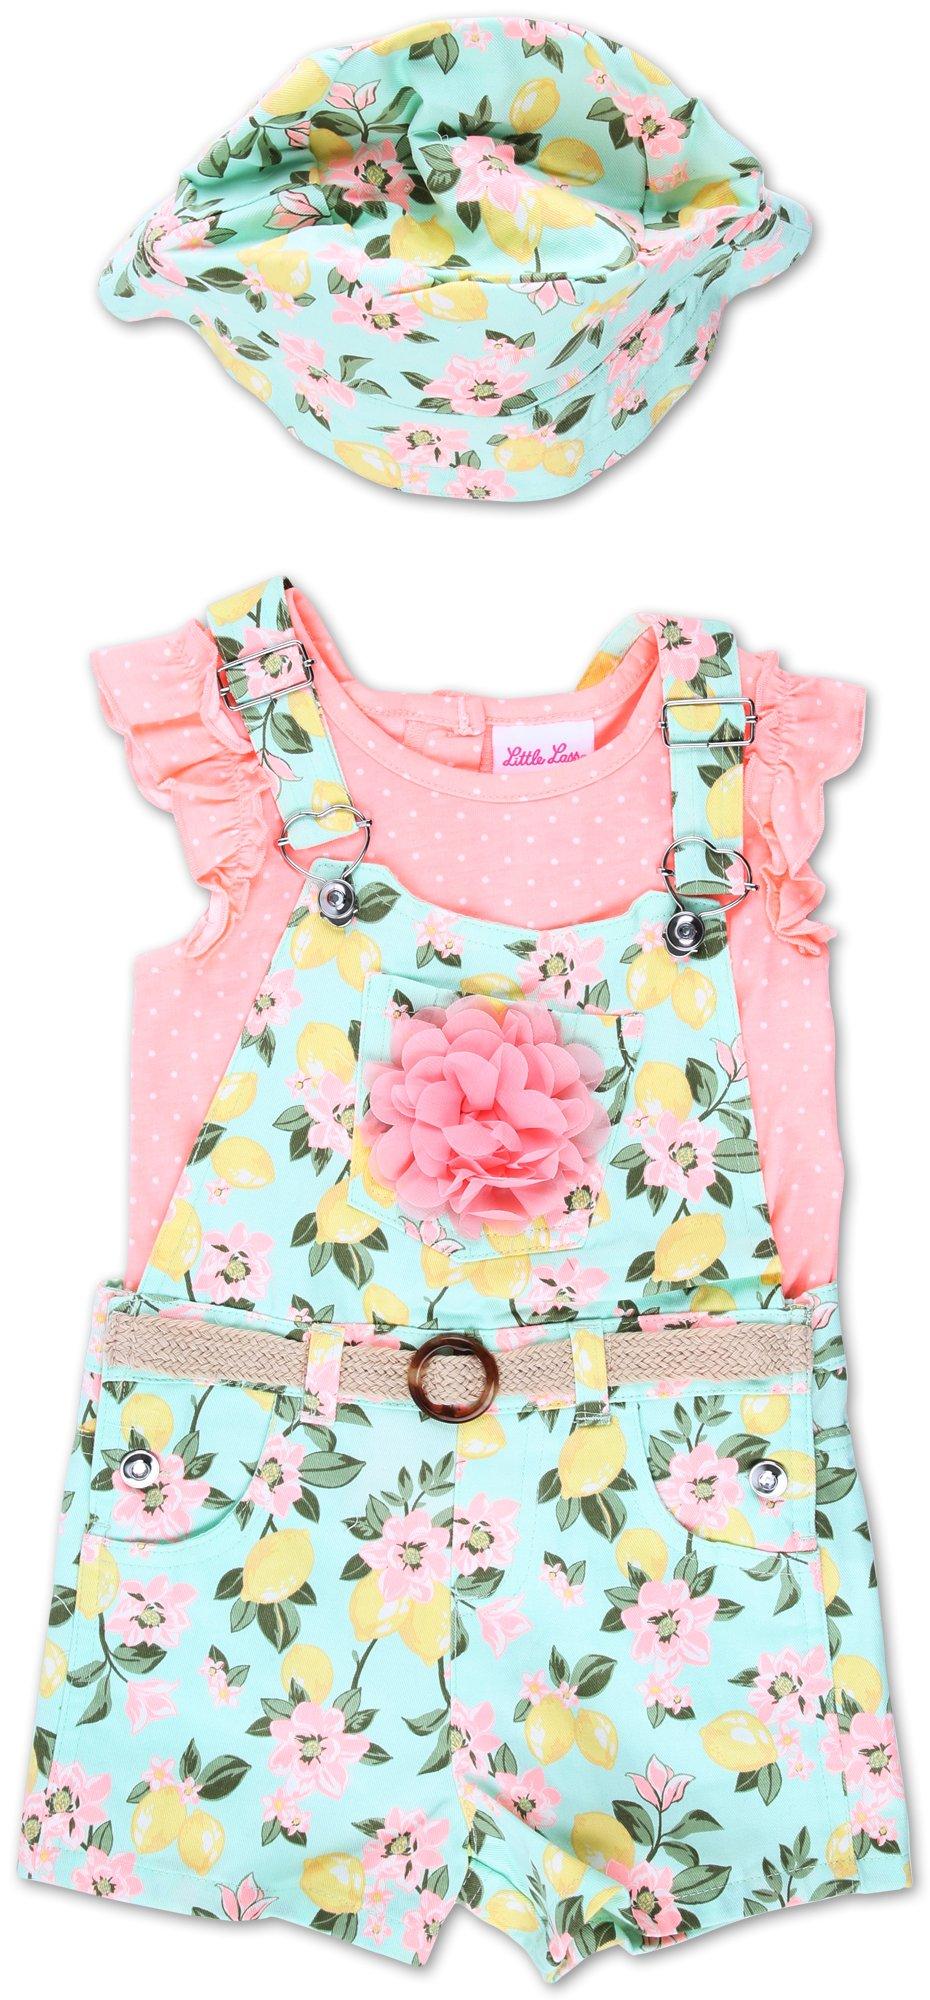 Little Girls 3 Pc Floral Overall Shorts Set